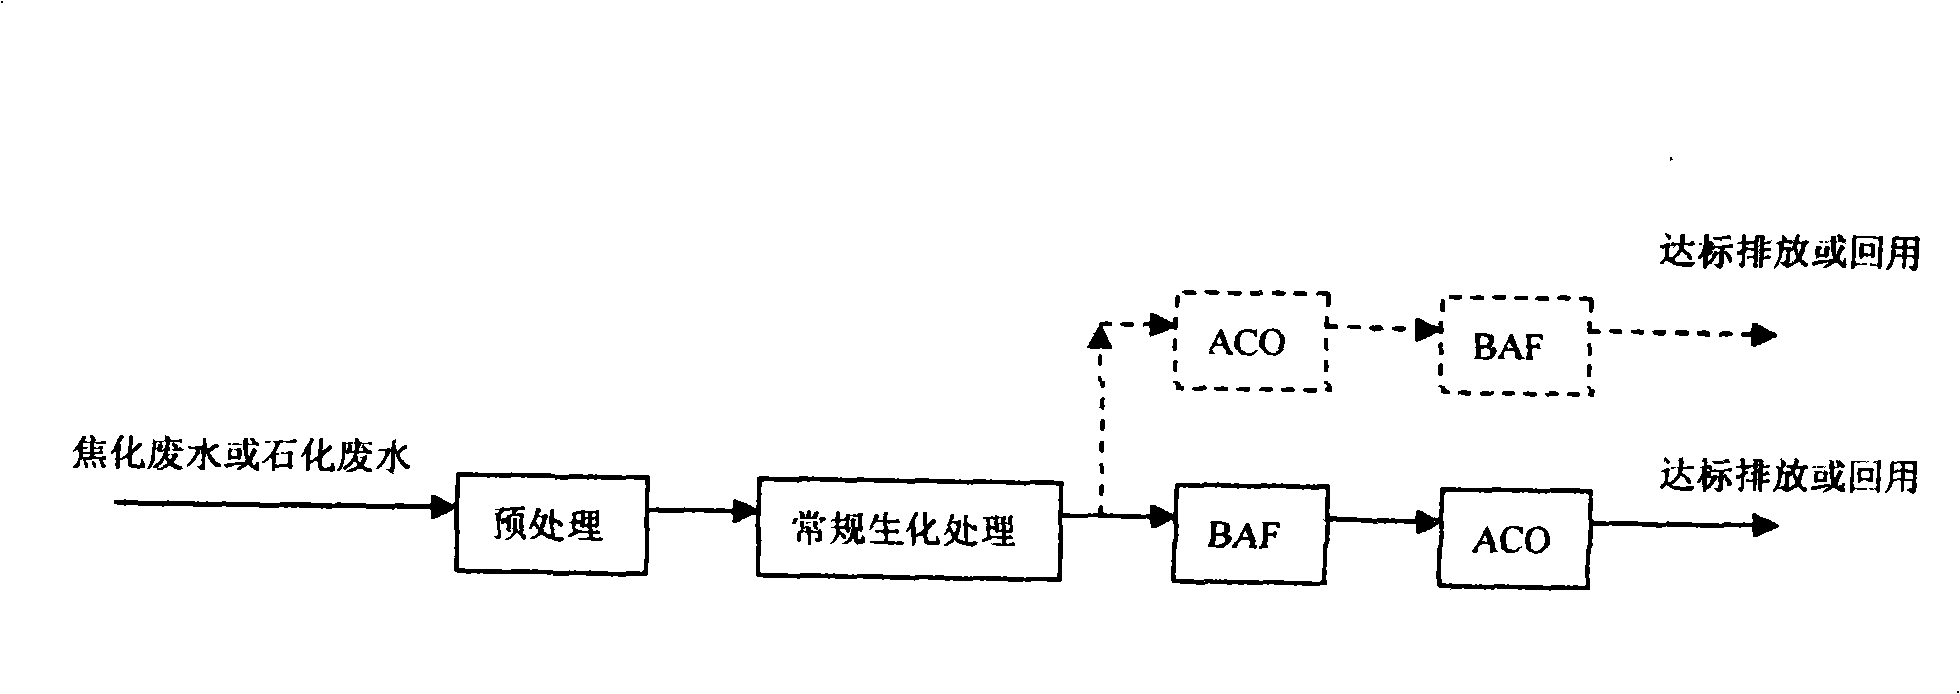 Coked and petrochemical wastewater treatment process having deep biochemical treatment and physicochemical treatment